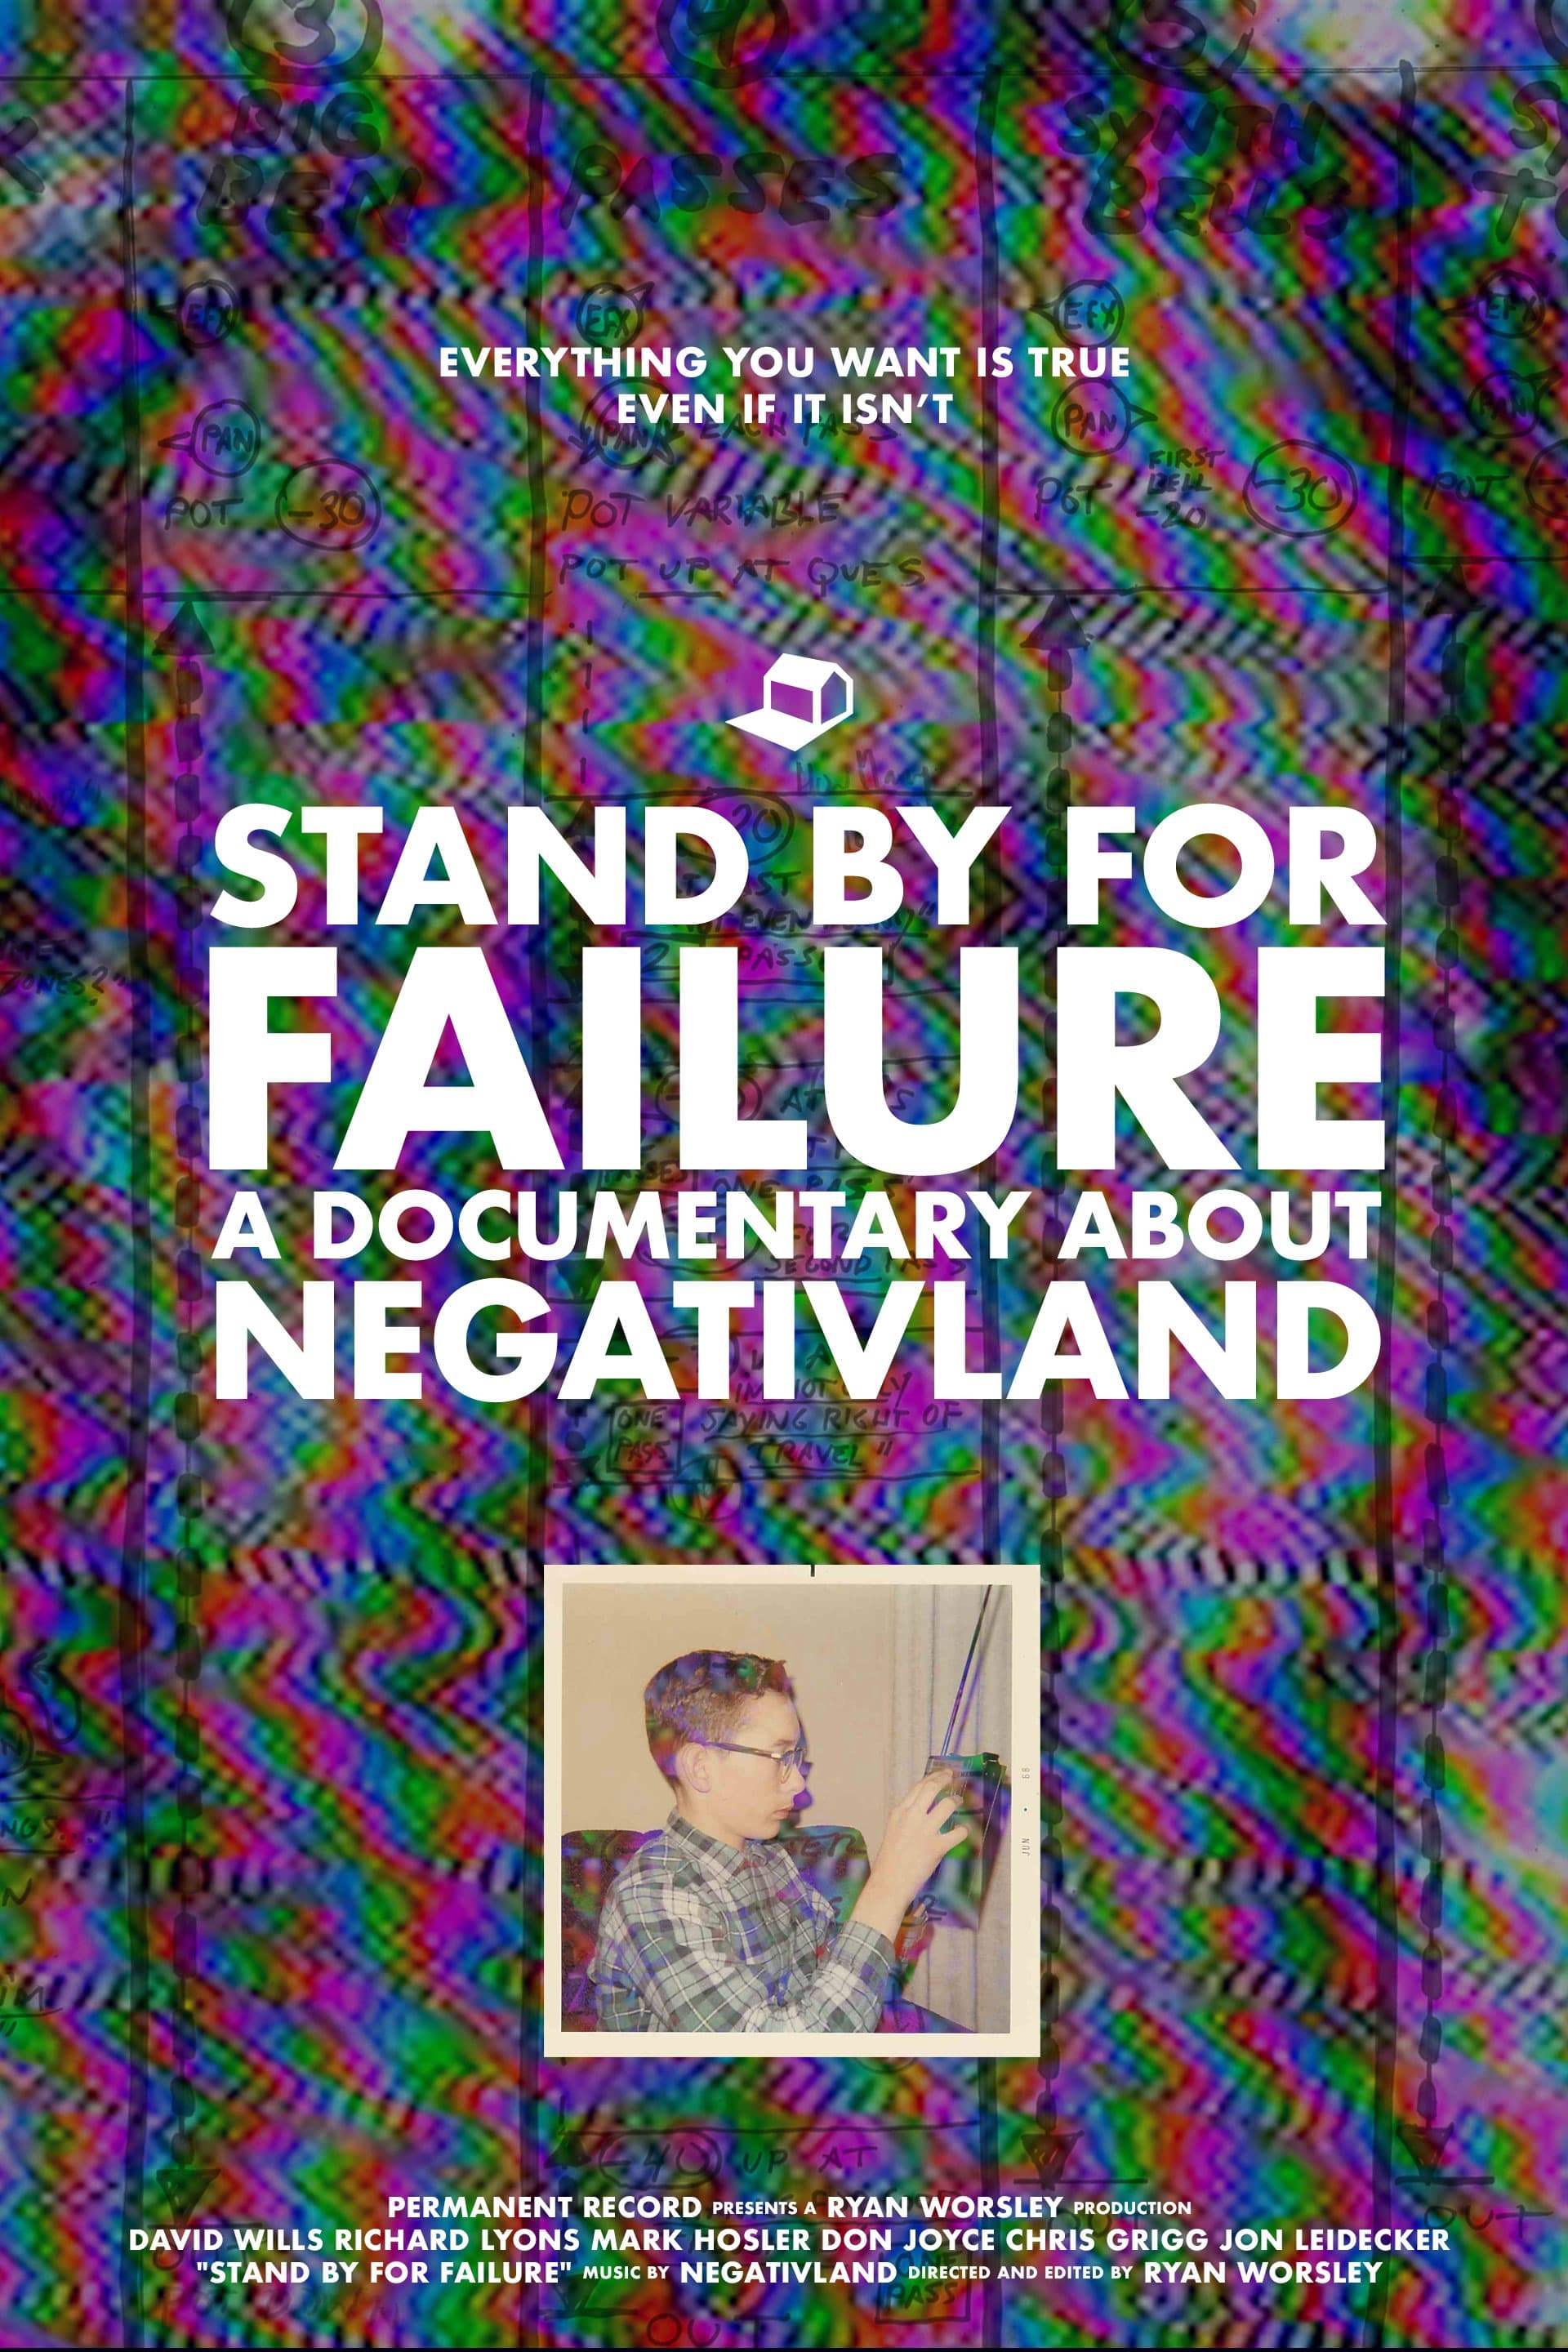 Stand By for Failure: A Documentary About Negativland